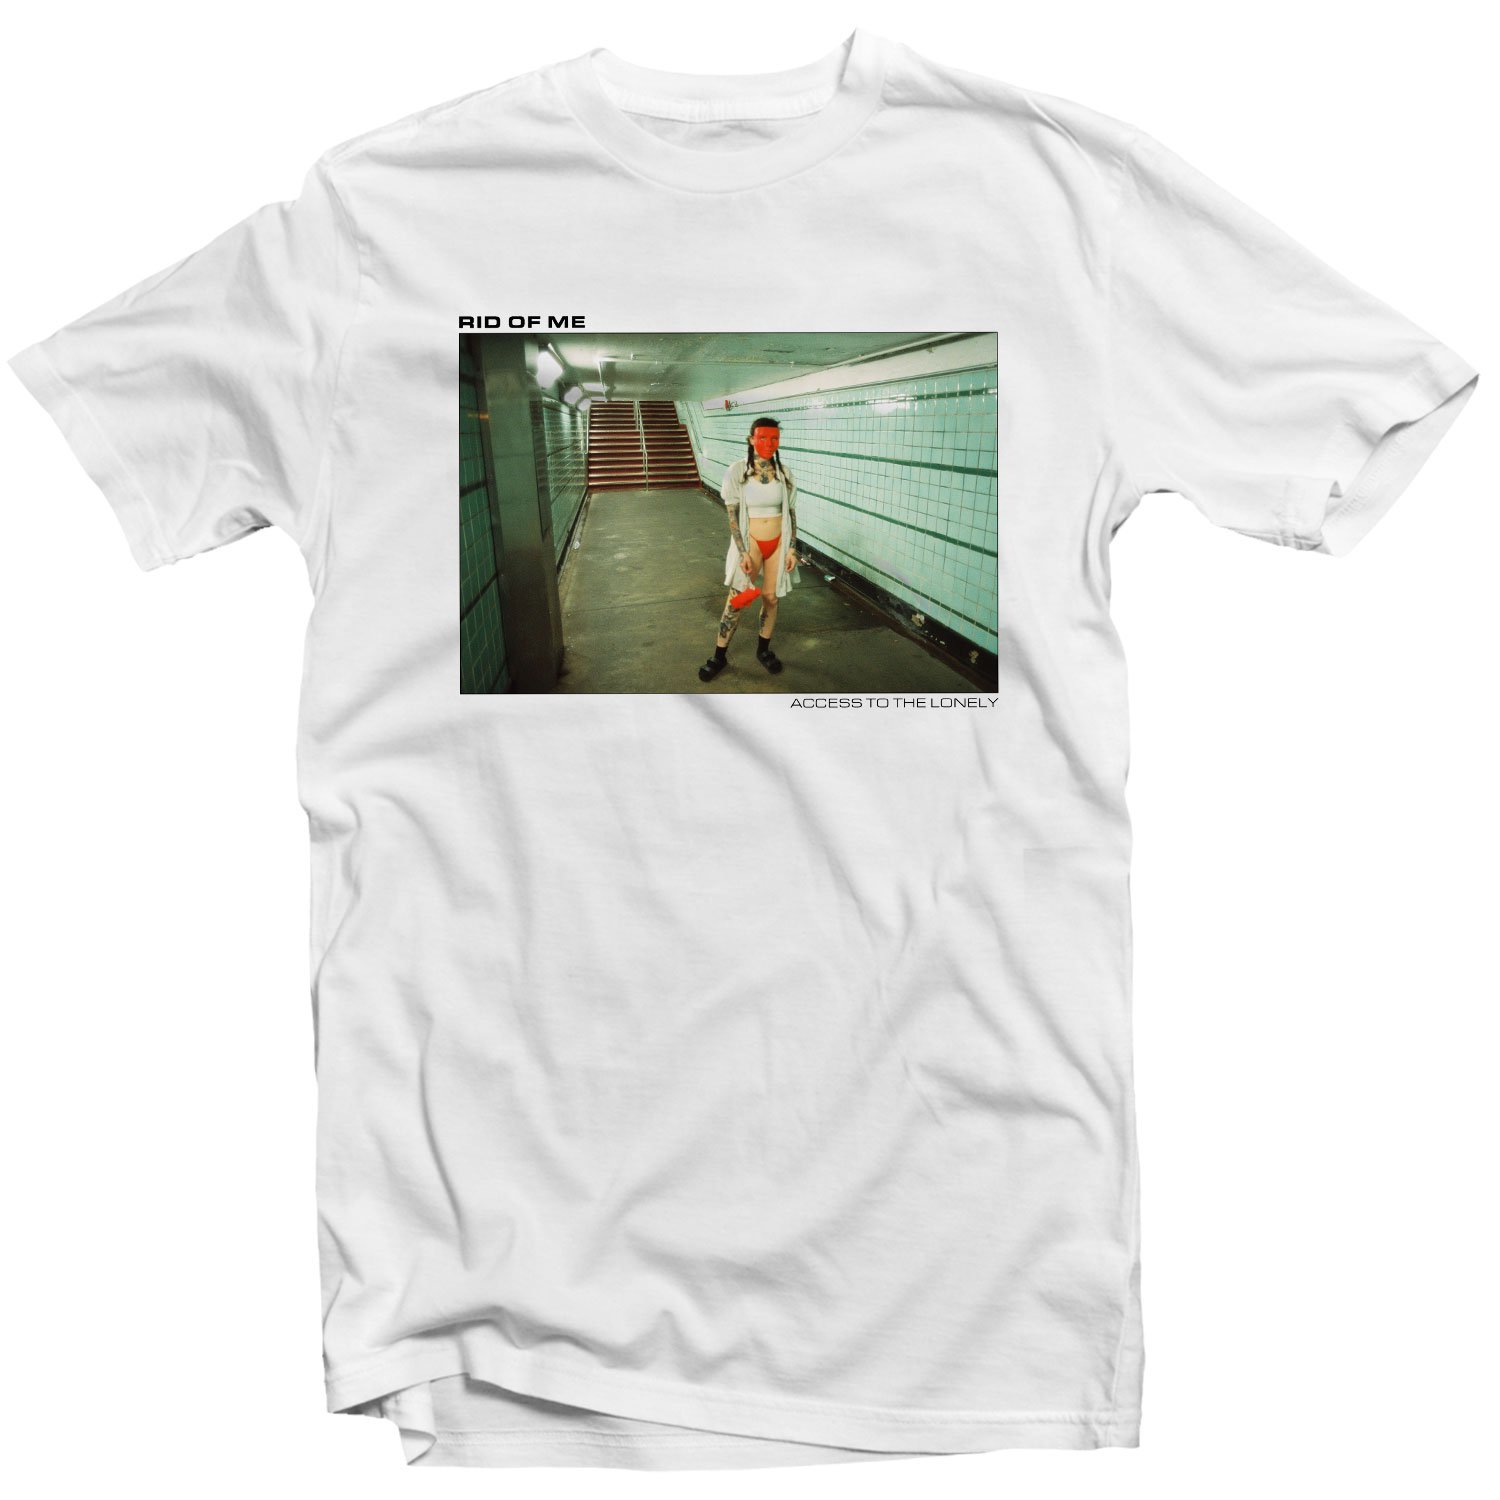 Rid Of Me - Access To The Lonely album cover t-shirt